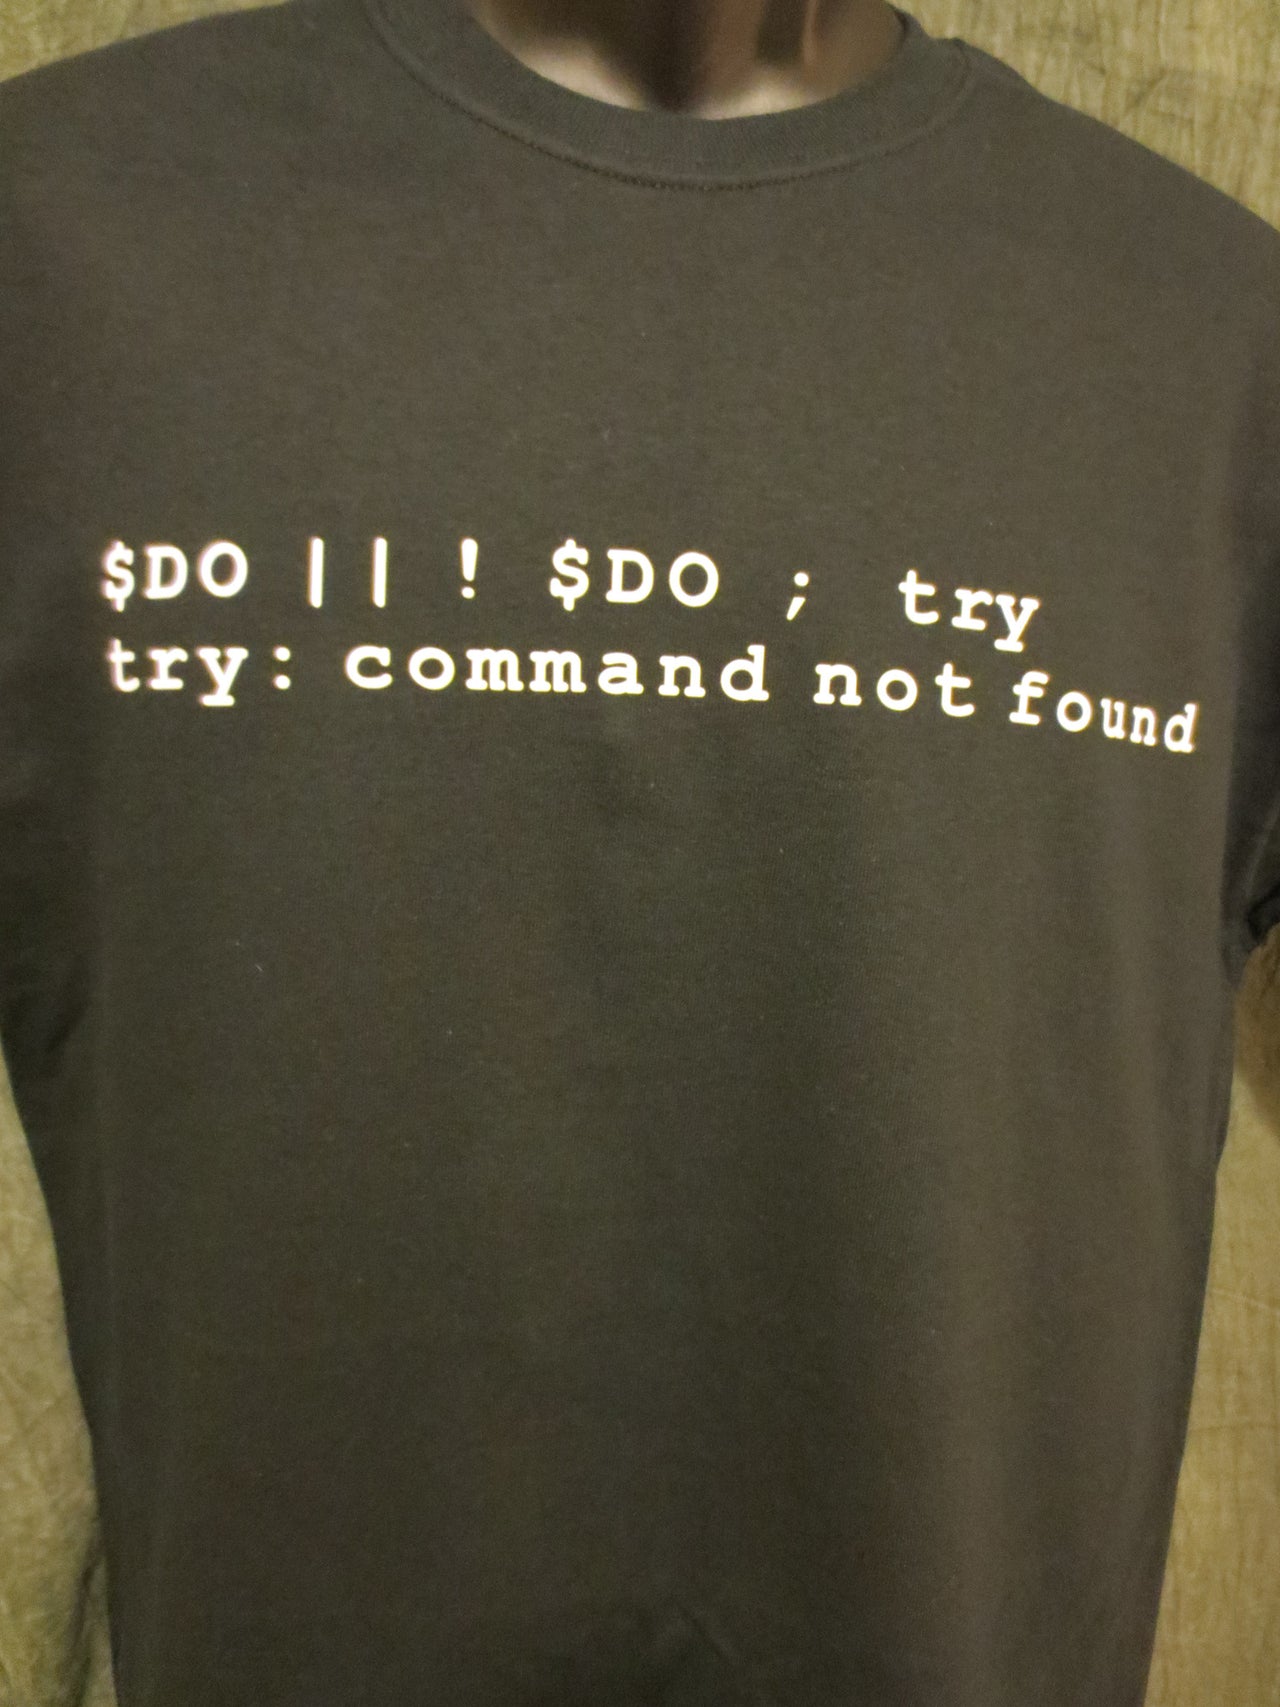 Do or Do Not; There is no Try (Computer Code Yoda Expression of Speech) Tshirt: Black With White Print - TshirtNow.net - 13